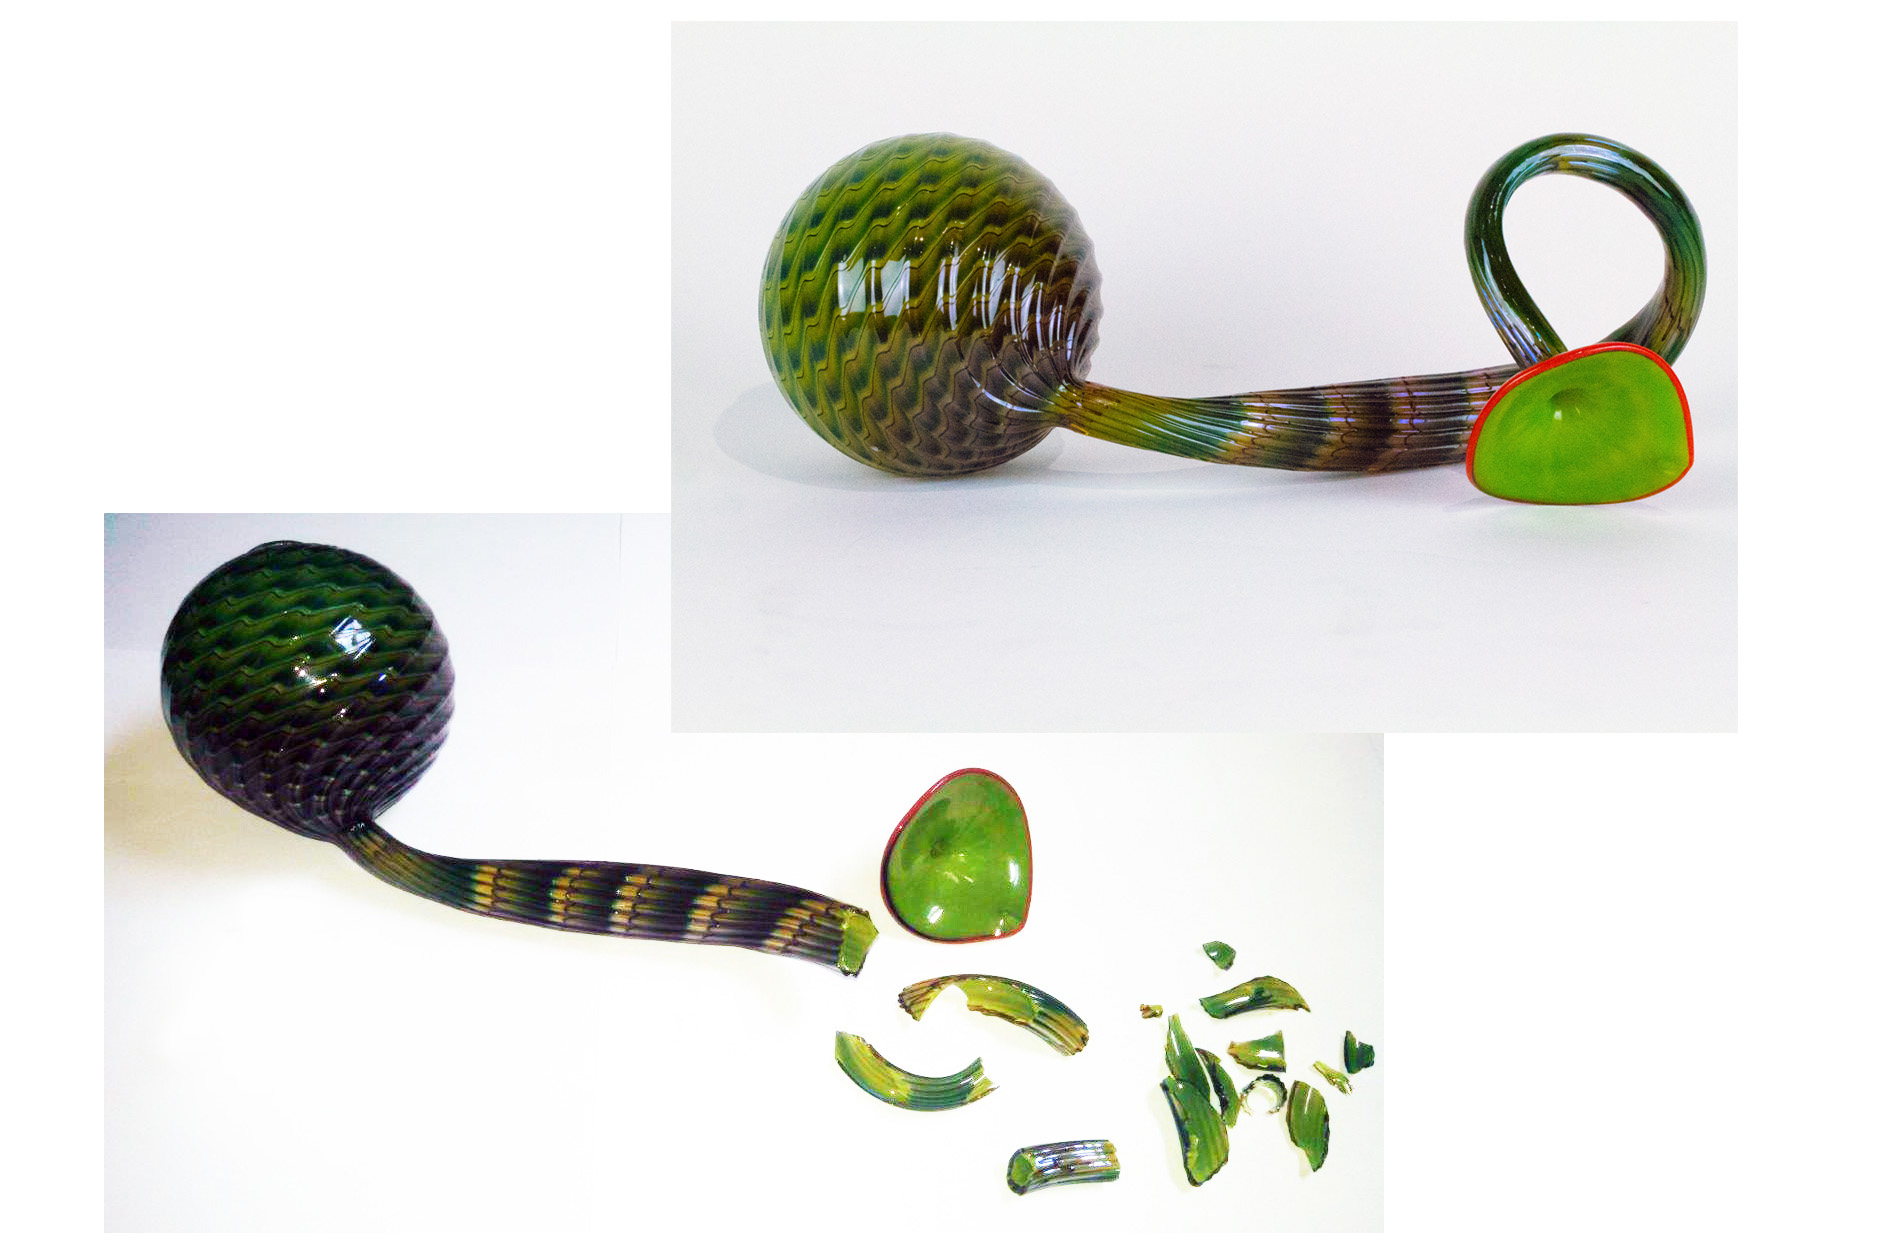 A green snake shaped glass pipe with pieces of it.